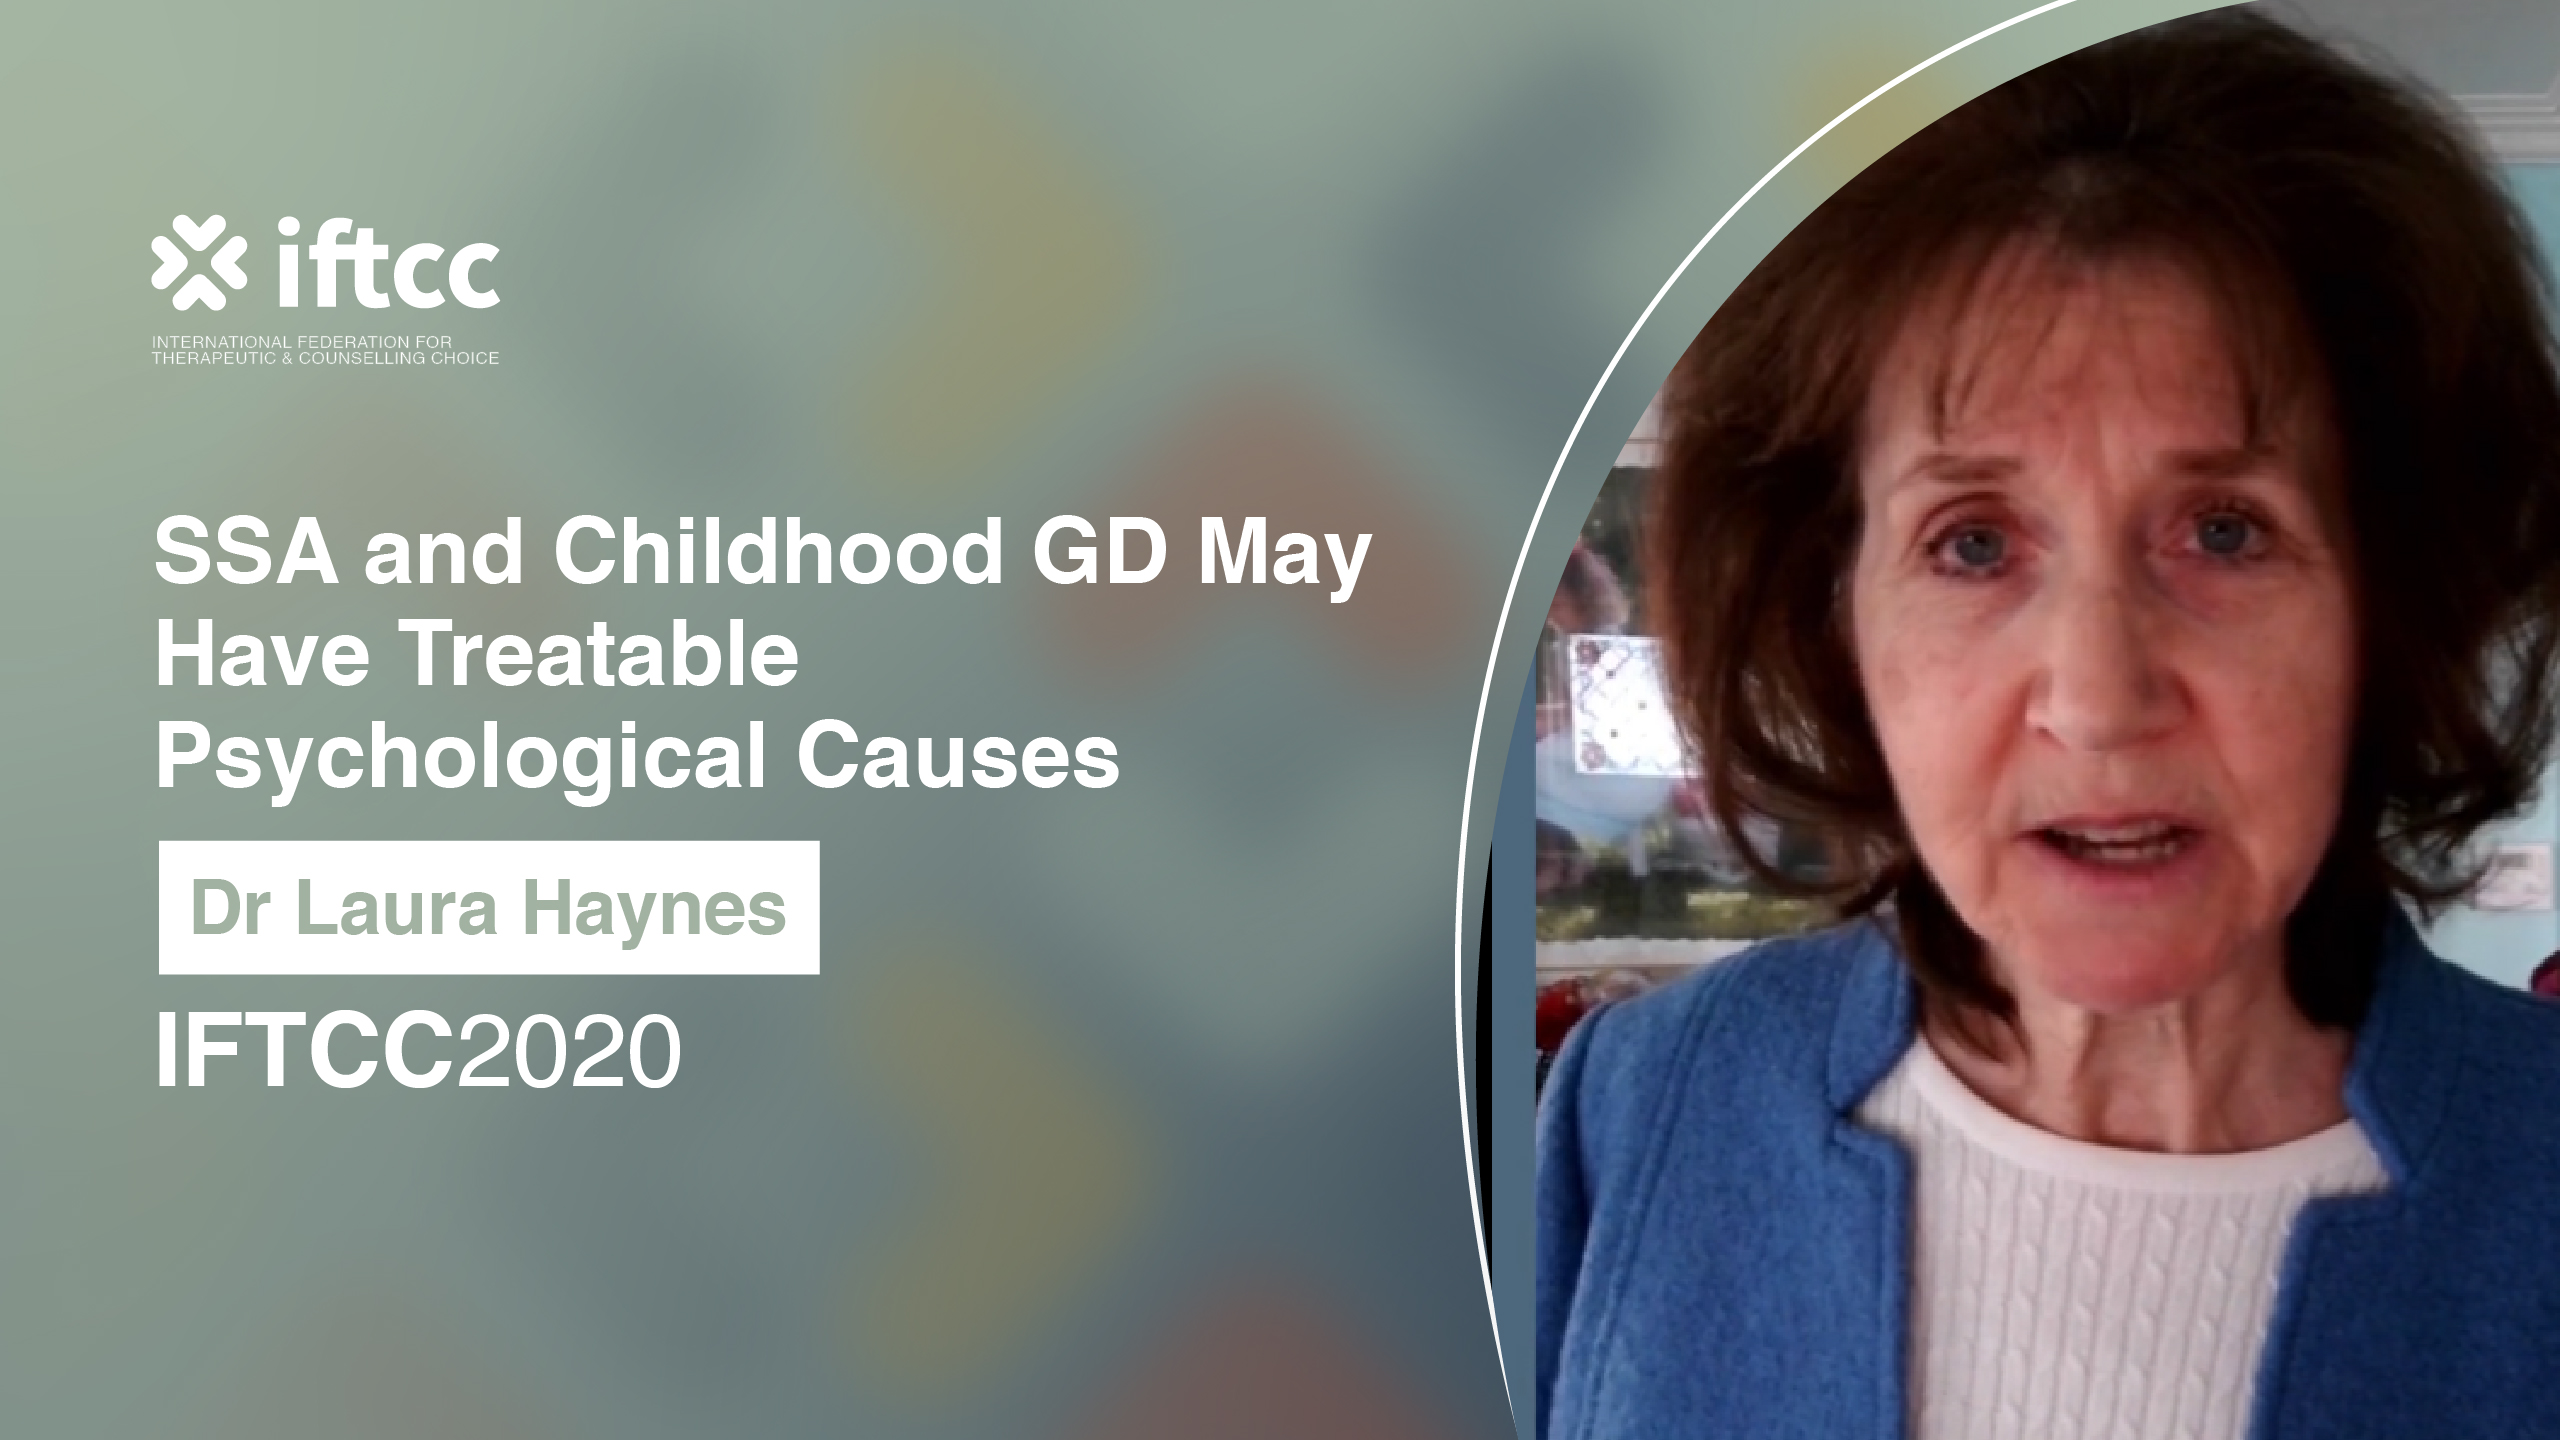 Session 5 – SSA and Childhood GD Have Treatable Psychological Causes [S5-20-21]